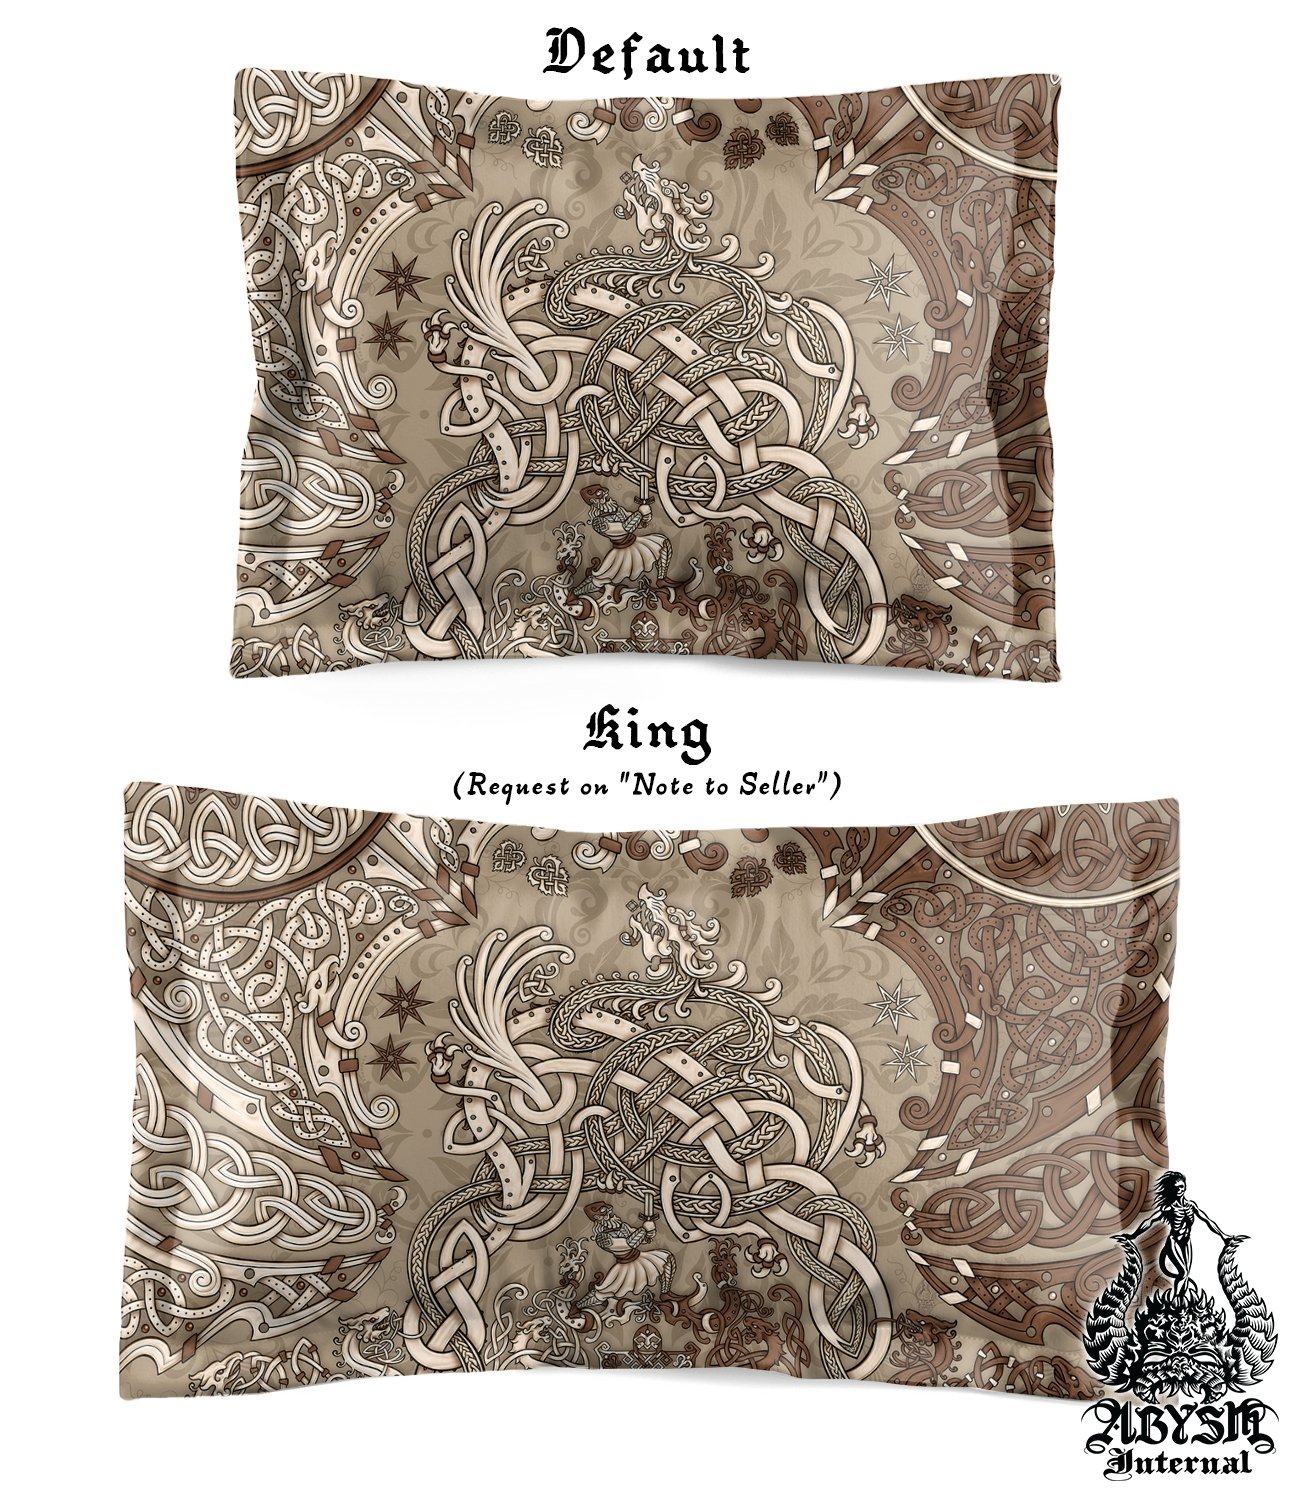 Viking Bedding Set, Comforter and Duvet, Norse Bed Cover and Bedroom Decor, Nordic Art, Sigurd kills Dragon Fafnir, King, Queen and Twin Size - Cream - Abysm Internal